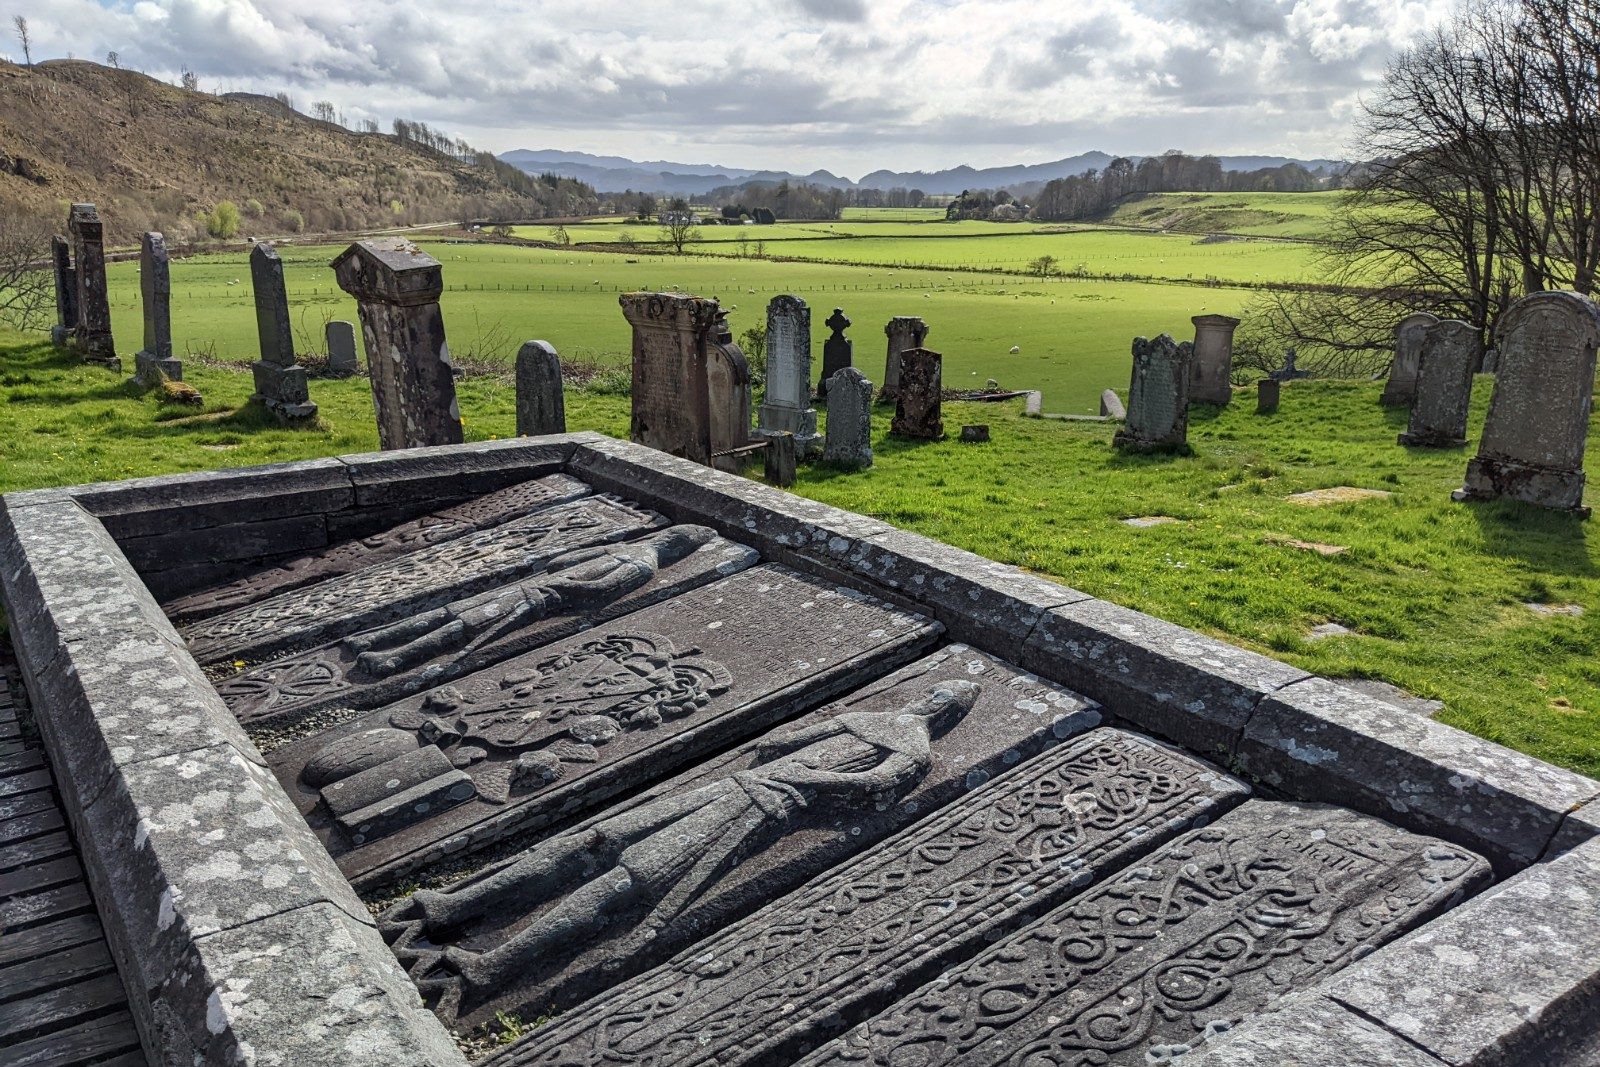 A horizontal stone enclosure on the ground of a graveyard containing seven grave slabs decorated with swords, vine patterns, and armoured warriors. Above is a serene, sunlit glen.